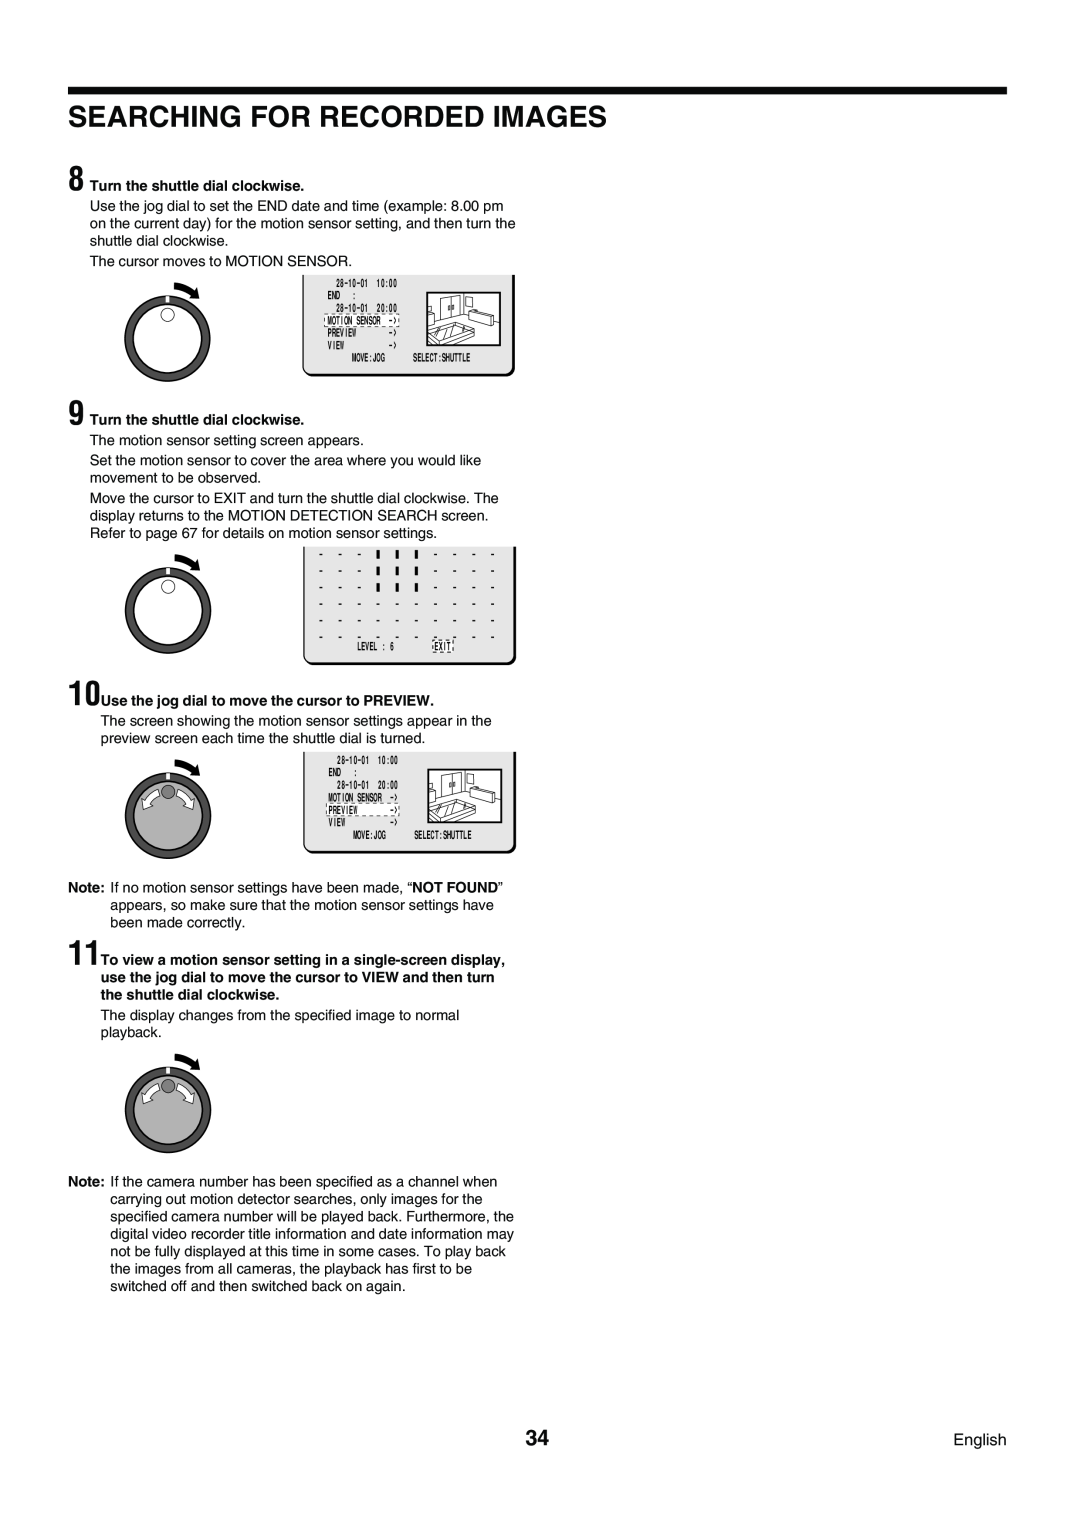 Sanyo DSR-3009P instruction manual Searching For Recorded Images, Turn the shuttle dial clockwise 